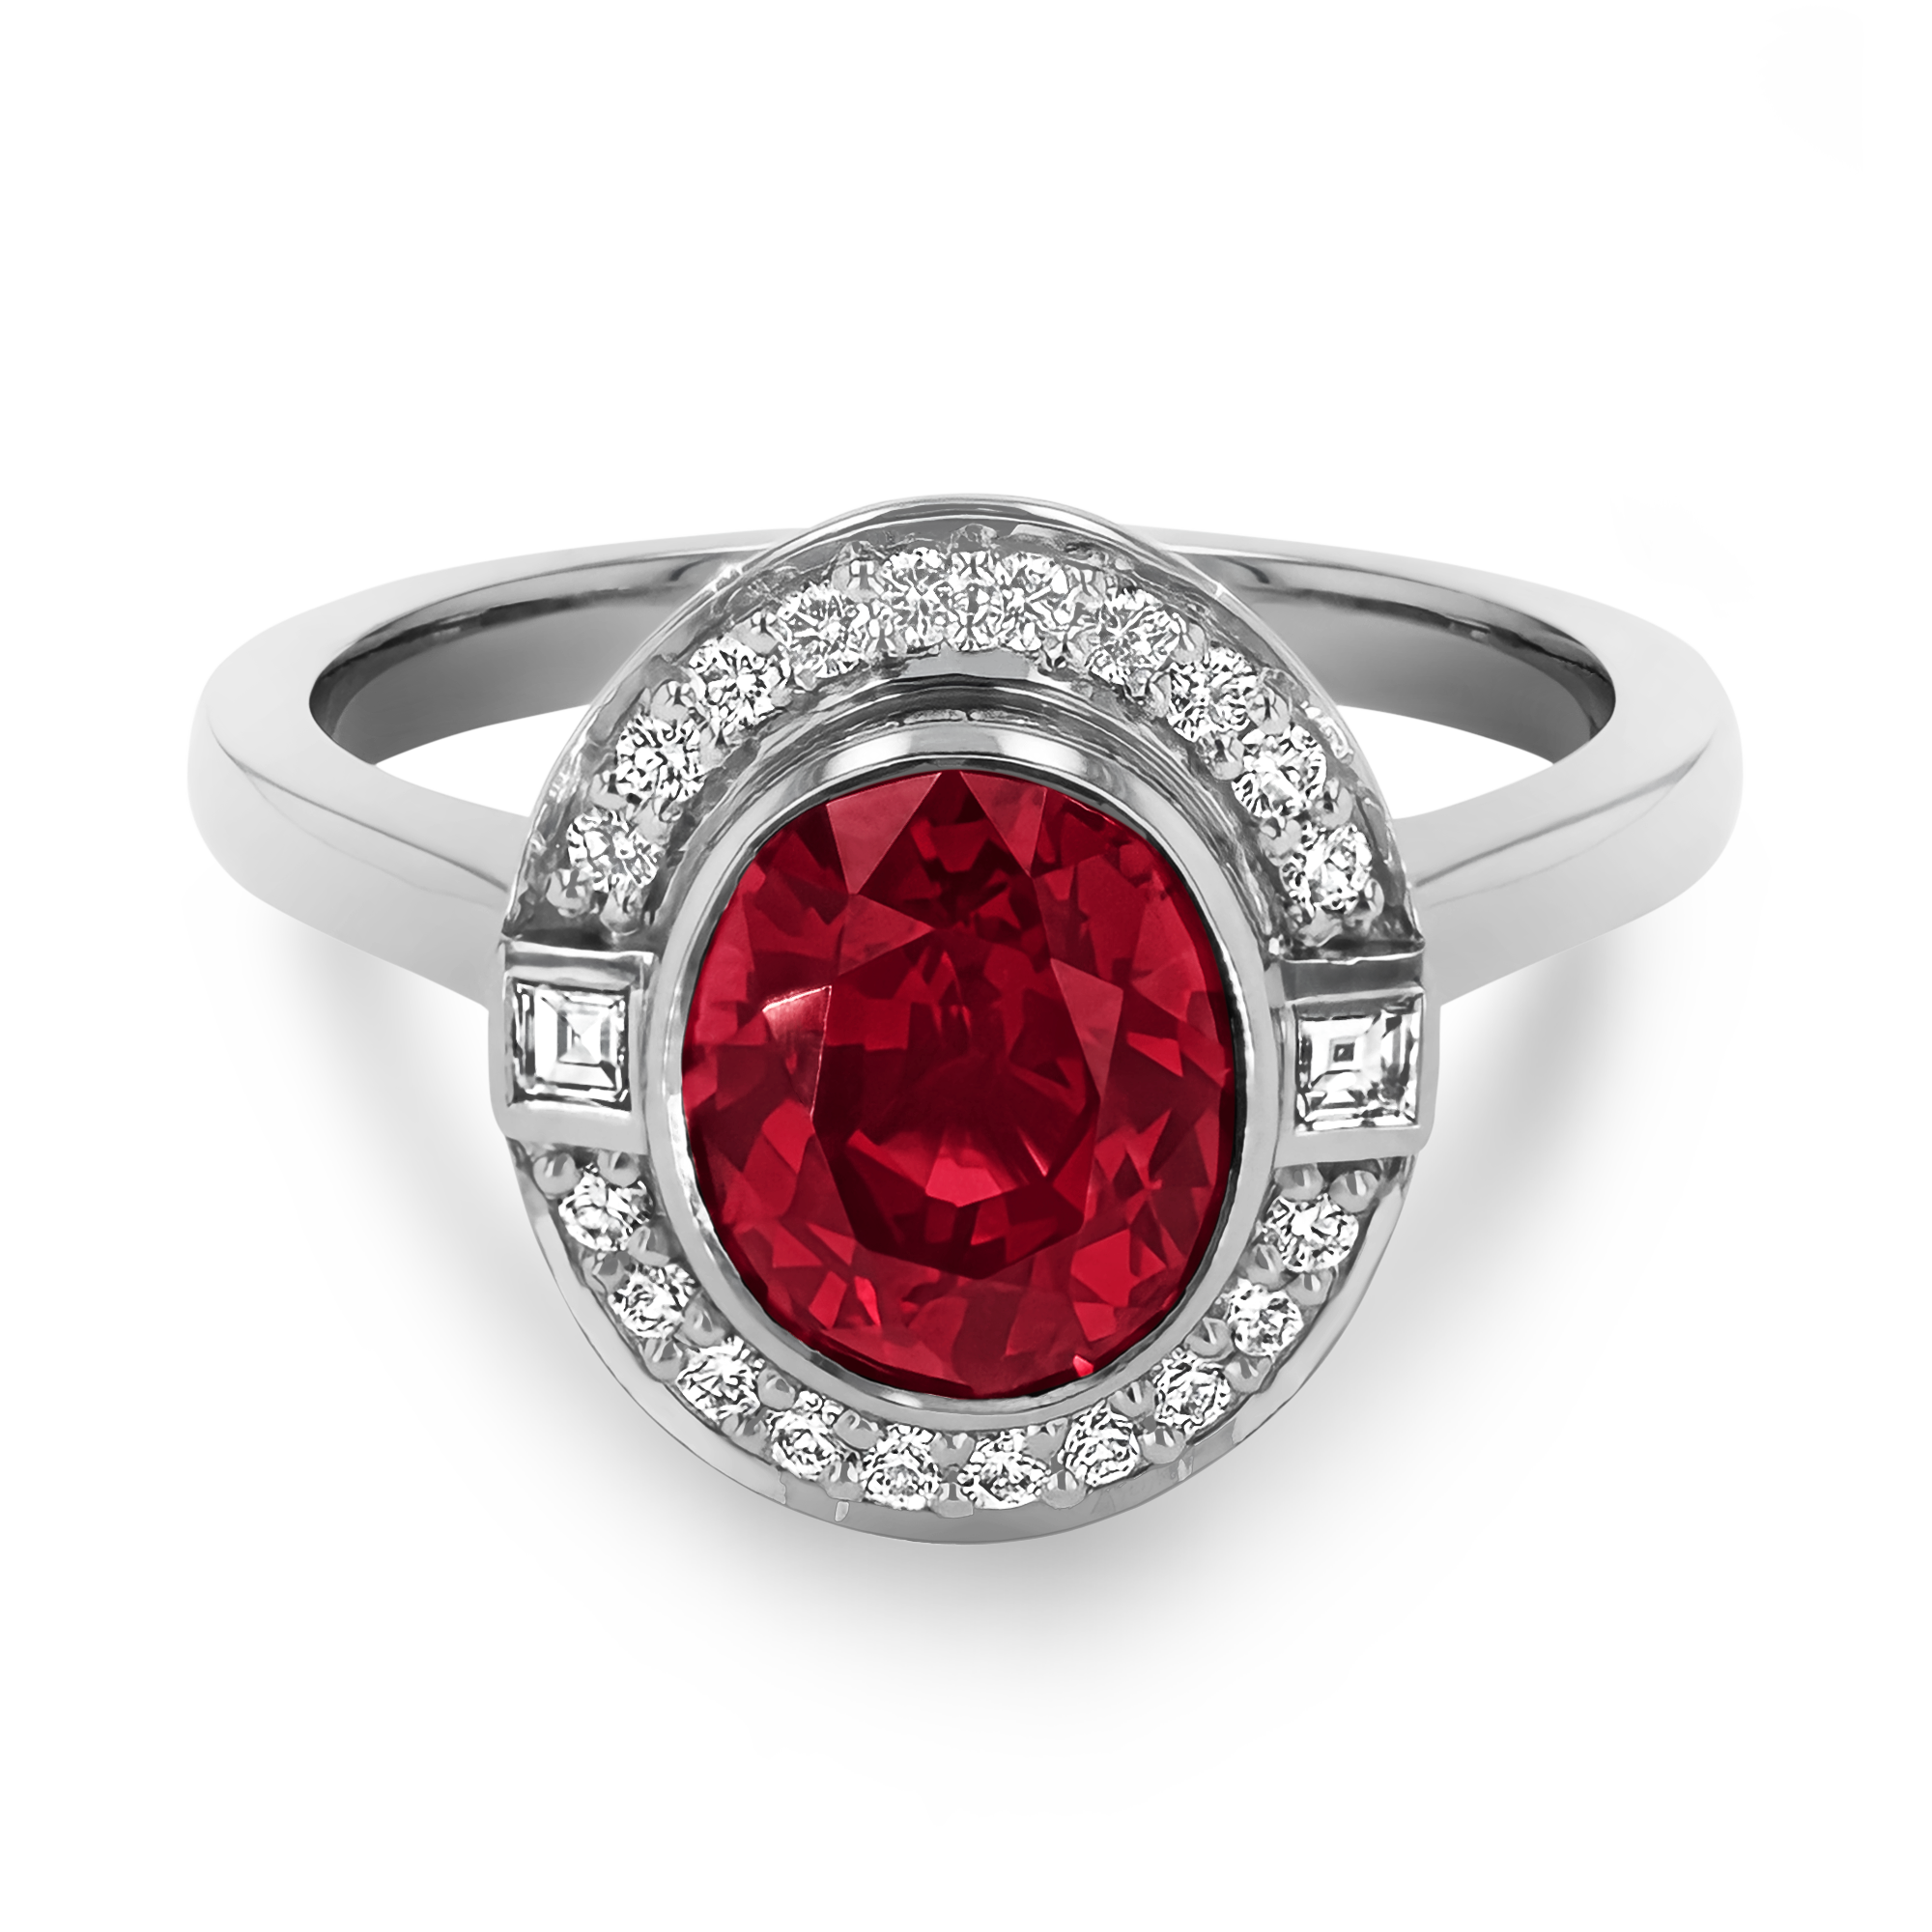 Mozambique 3.01ct Ruby and Diamond Cluster Ring Oval Cut, Rubover Set_2